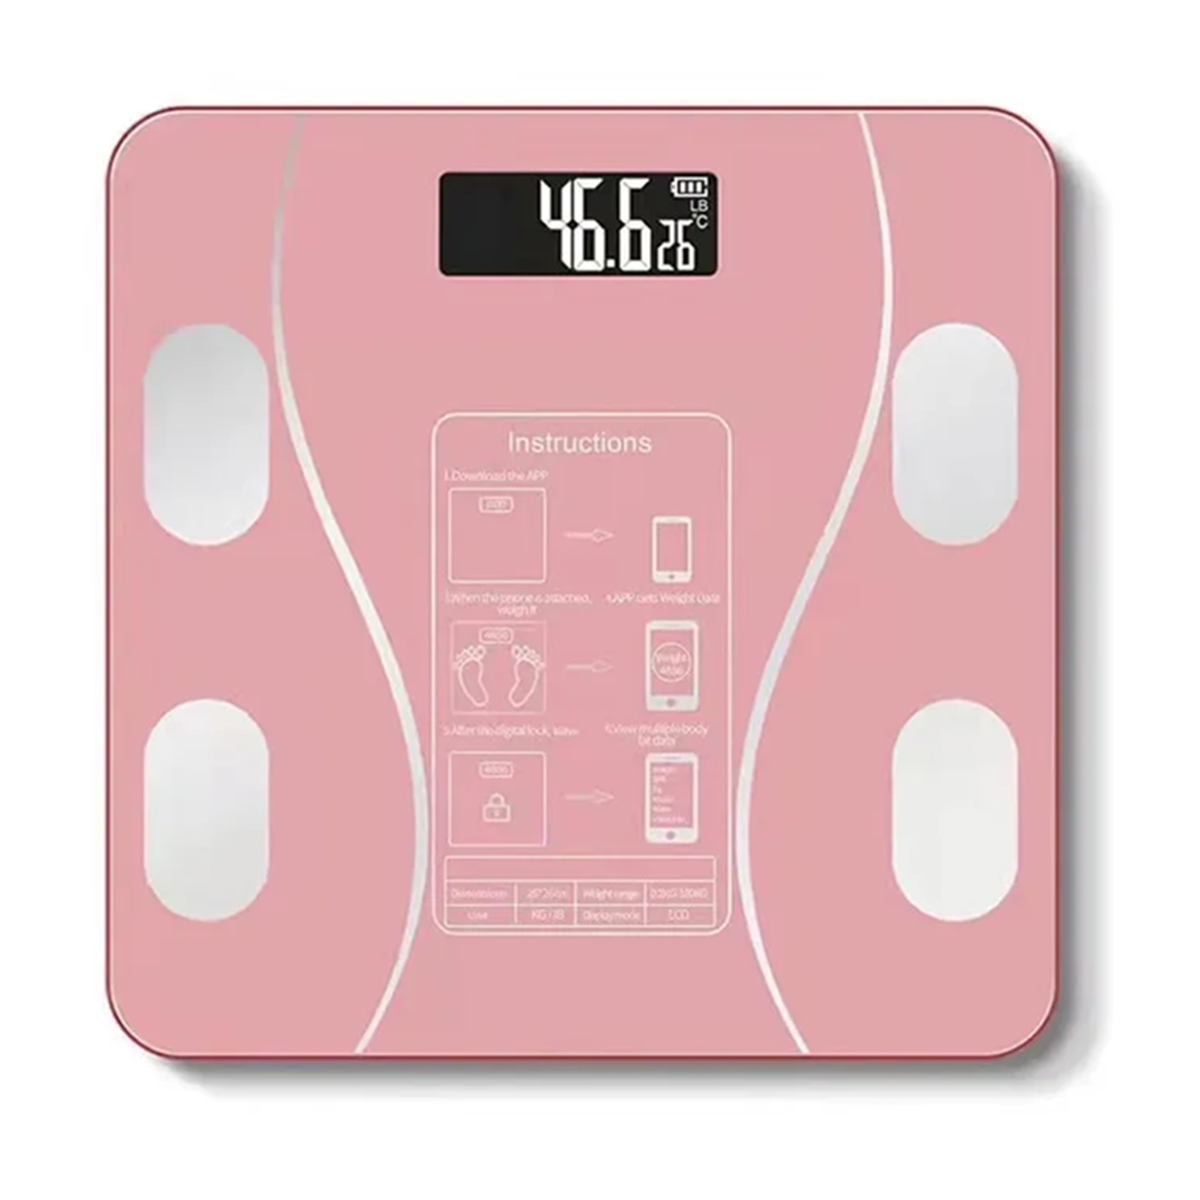 Smart weight scale. Body fat and health measurement digital